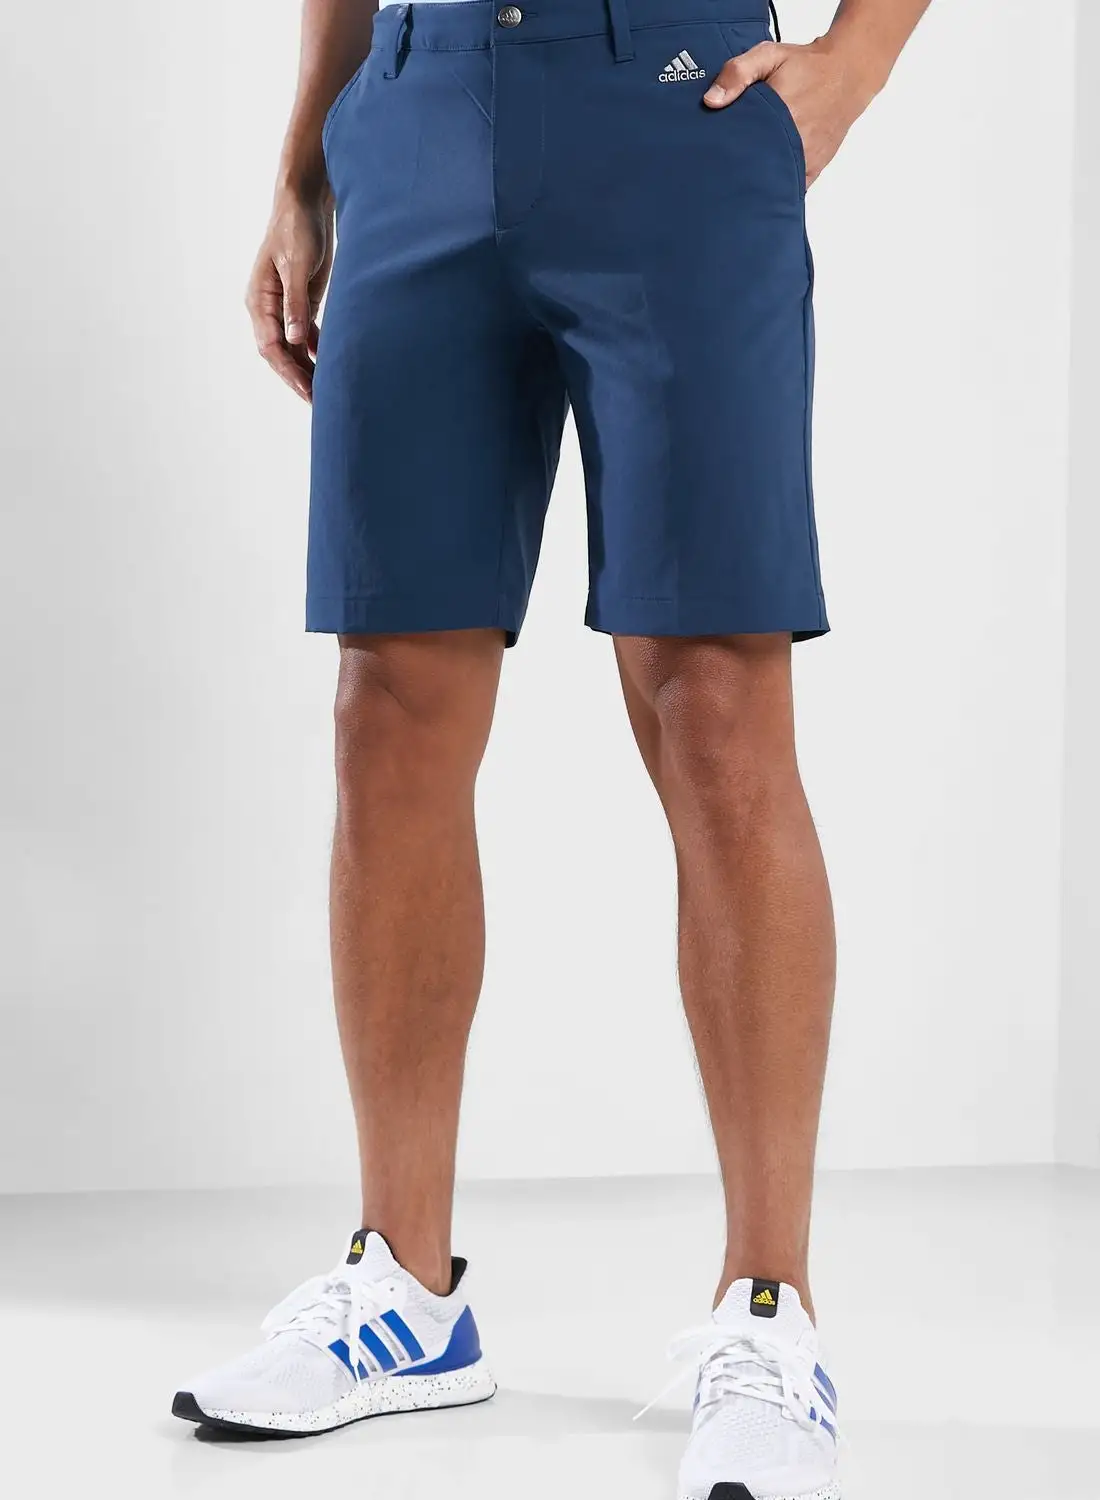 Adidas Recycled Content Golf Shorts